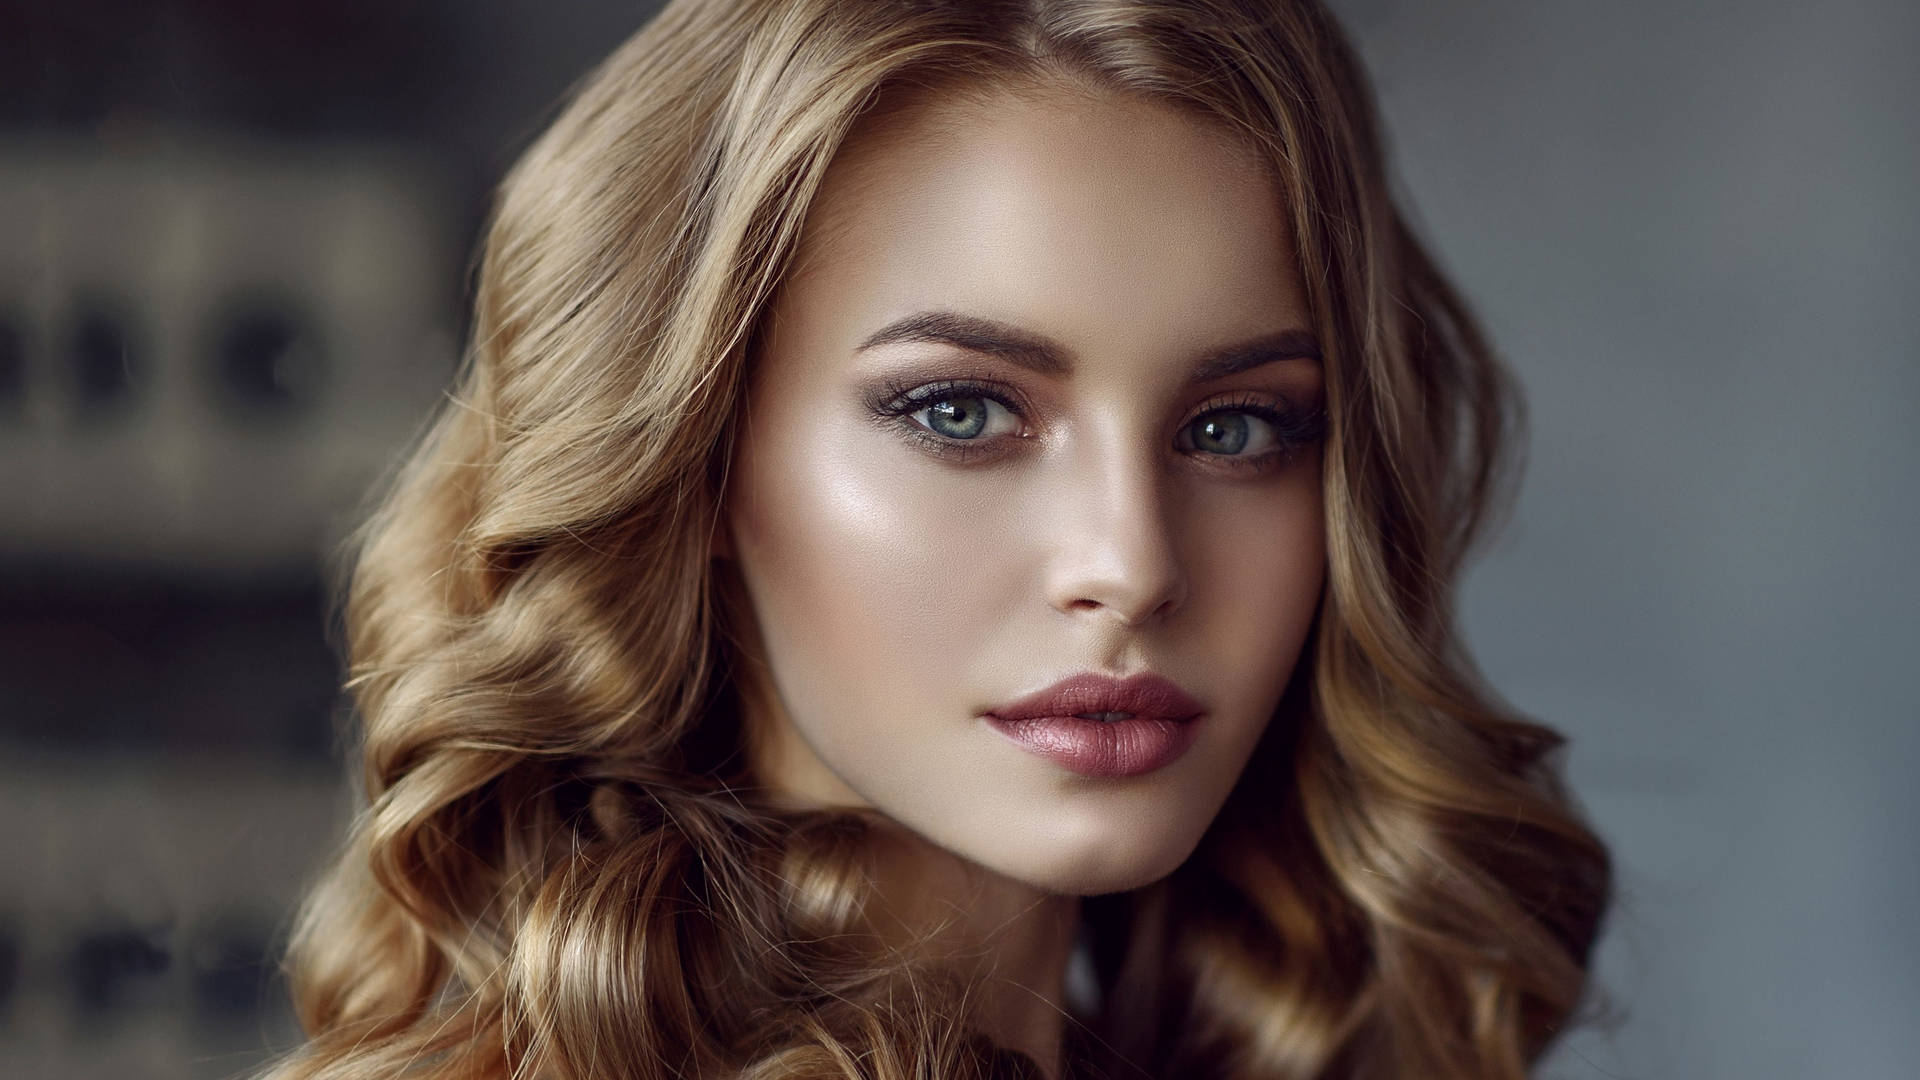 Model's Face With Blonde Hair Background